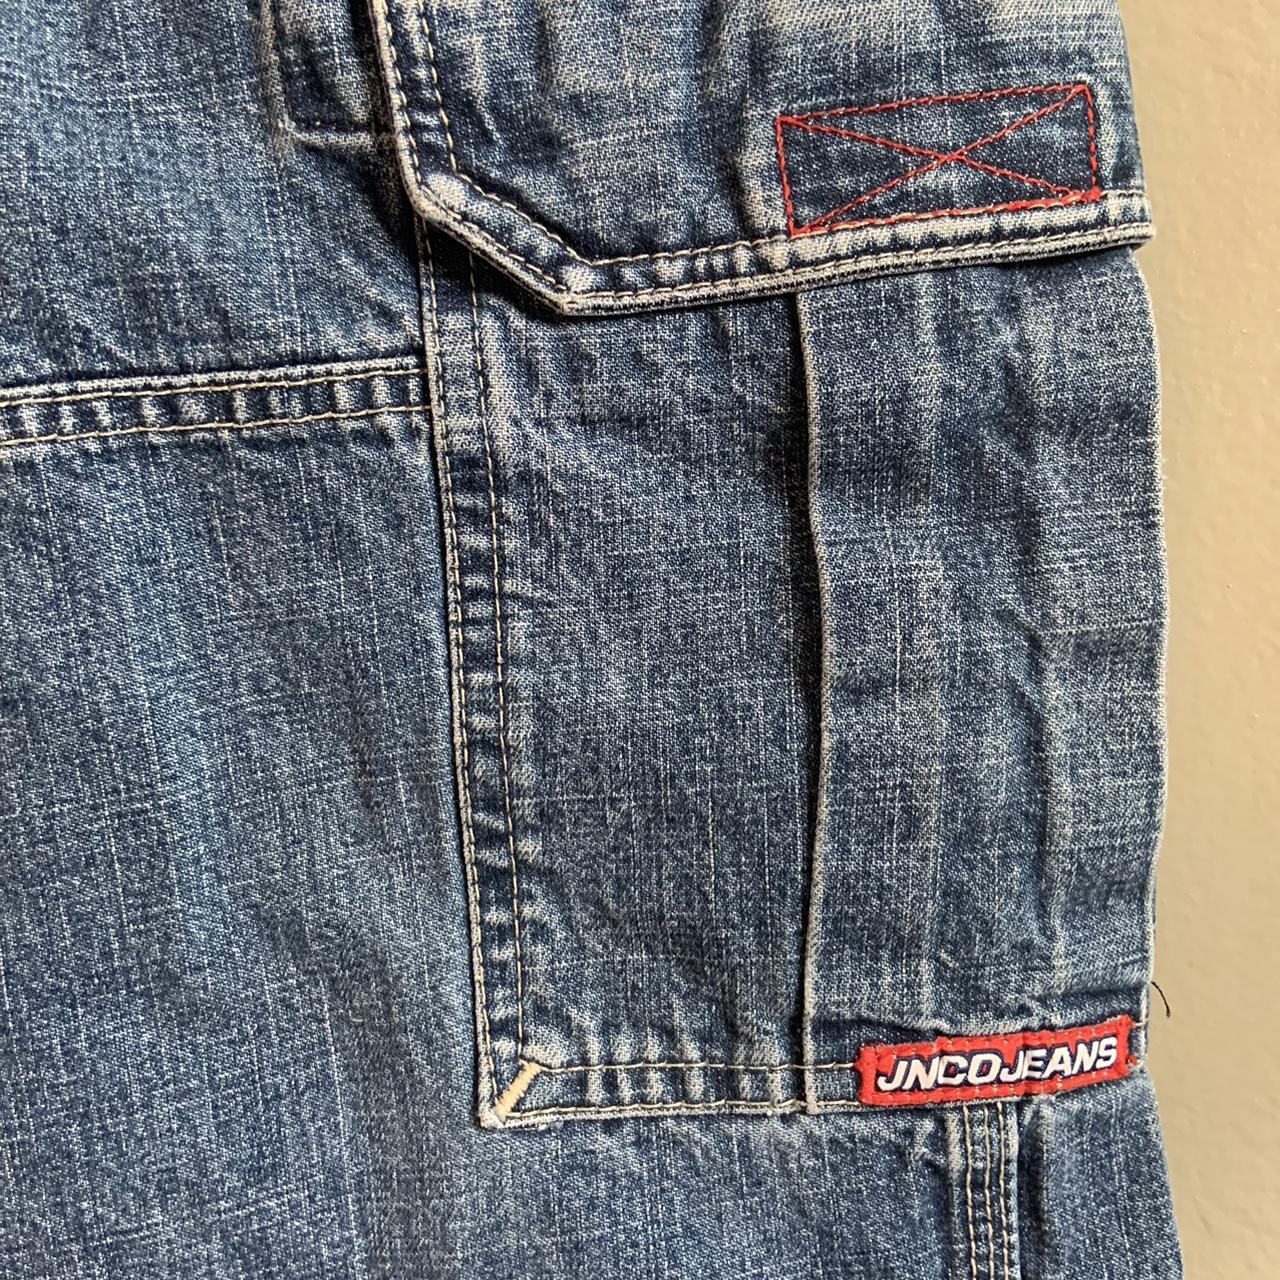 JNCO JEANS edit: added pictures of measurements - Depop